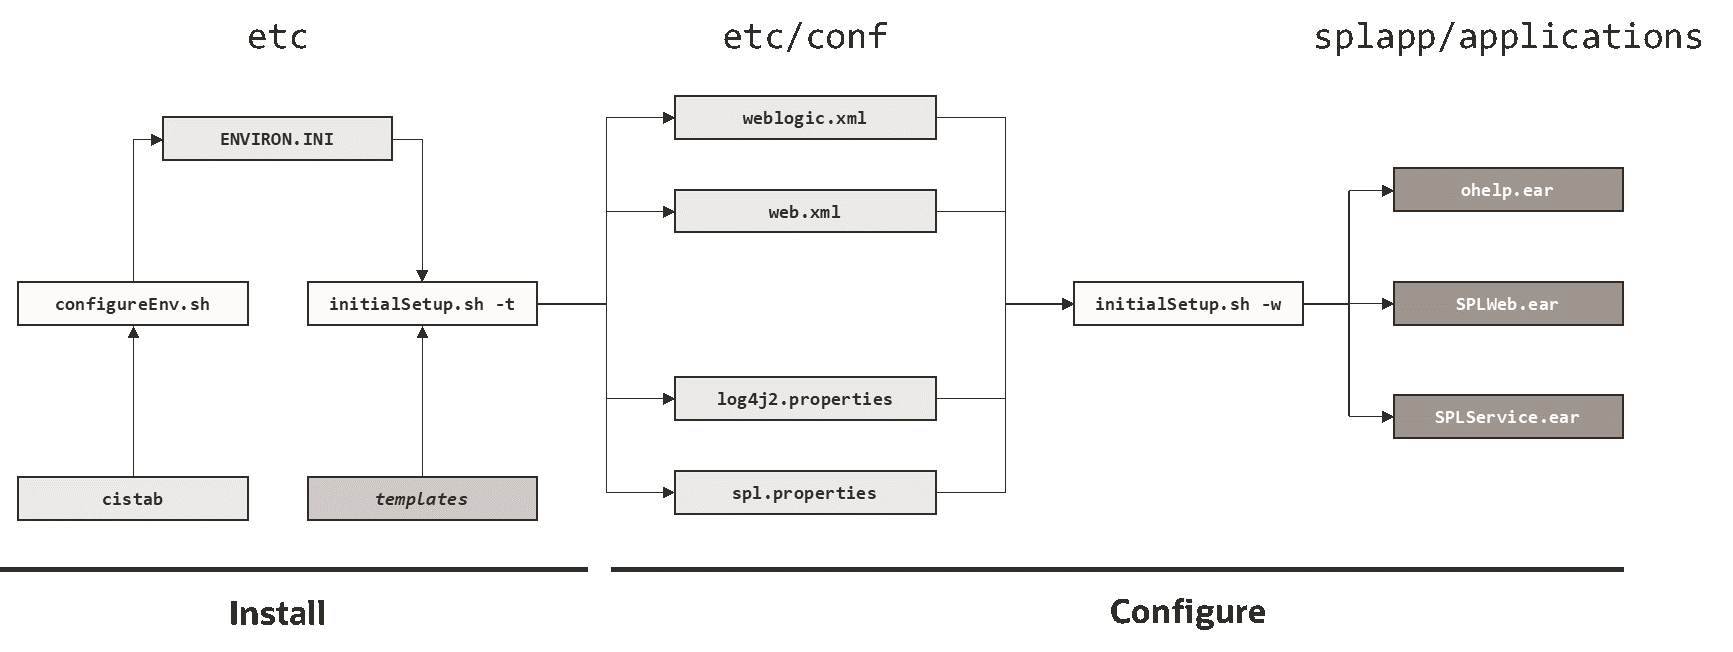 Diagram that shows the structure of the Web Application Server Configuration Process.